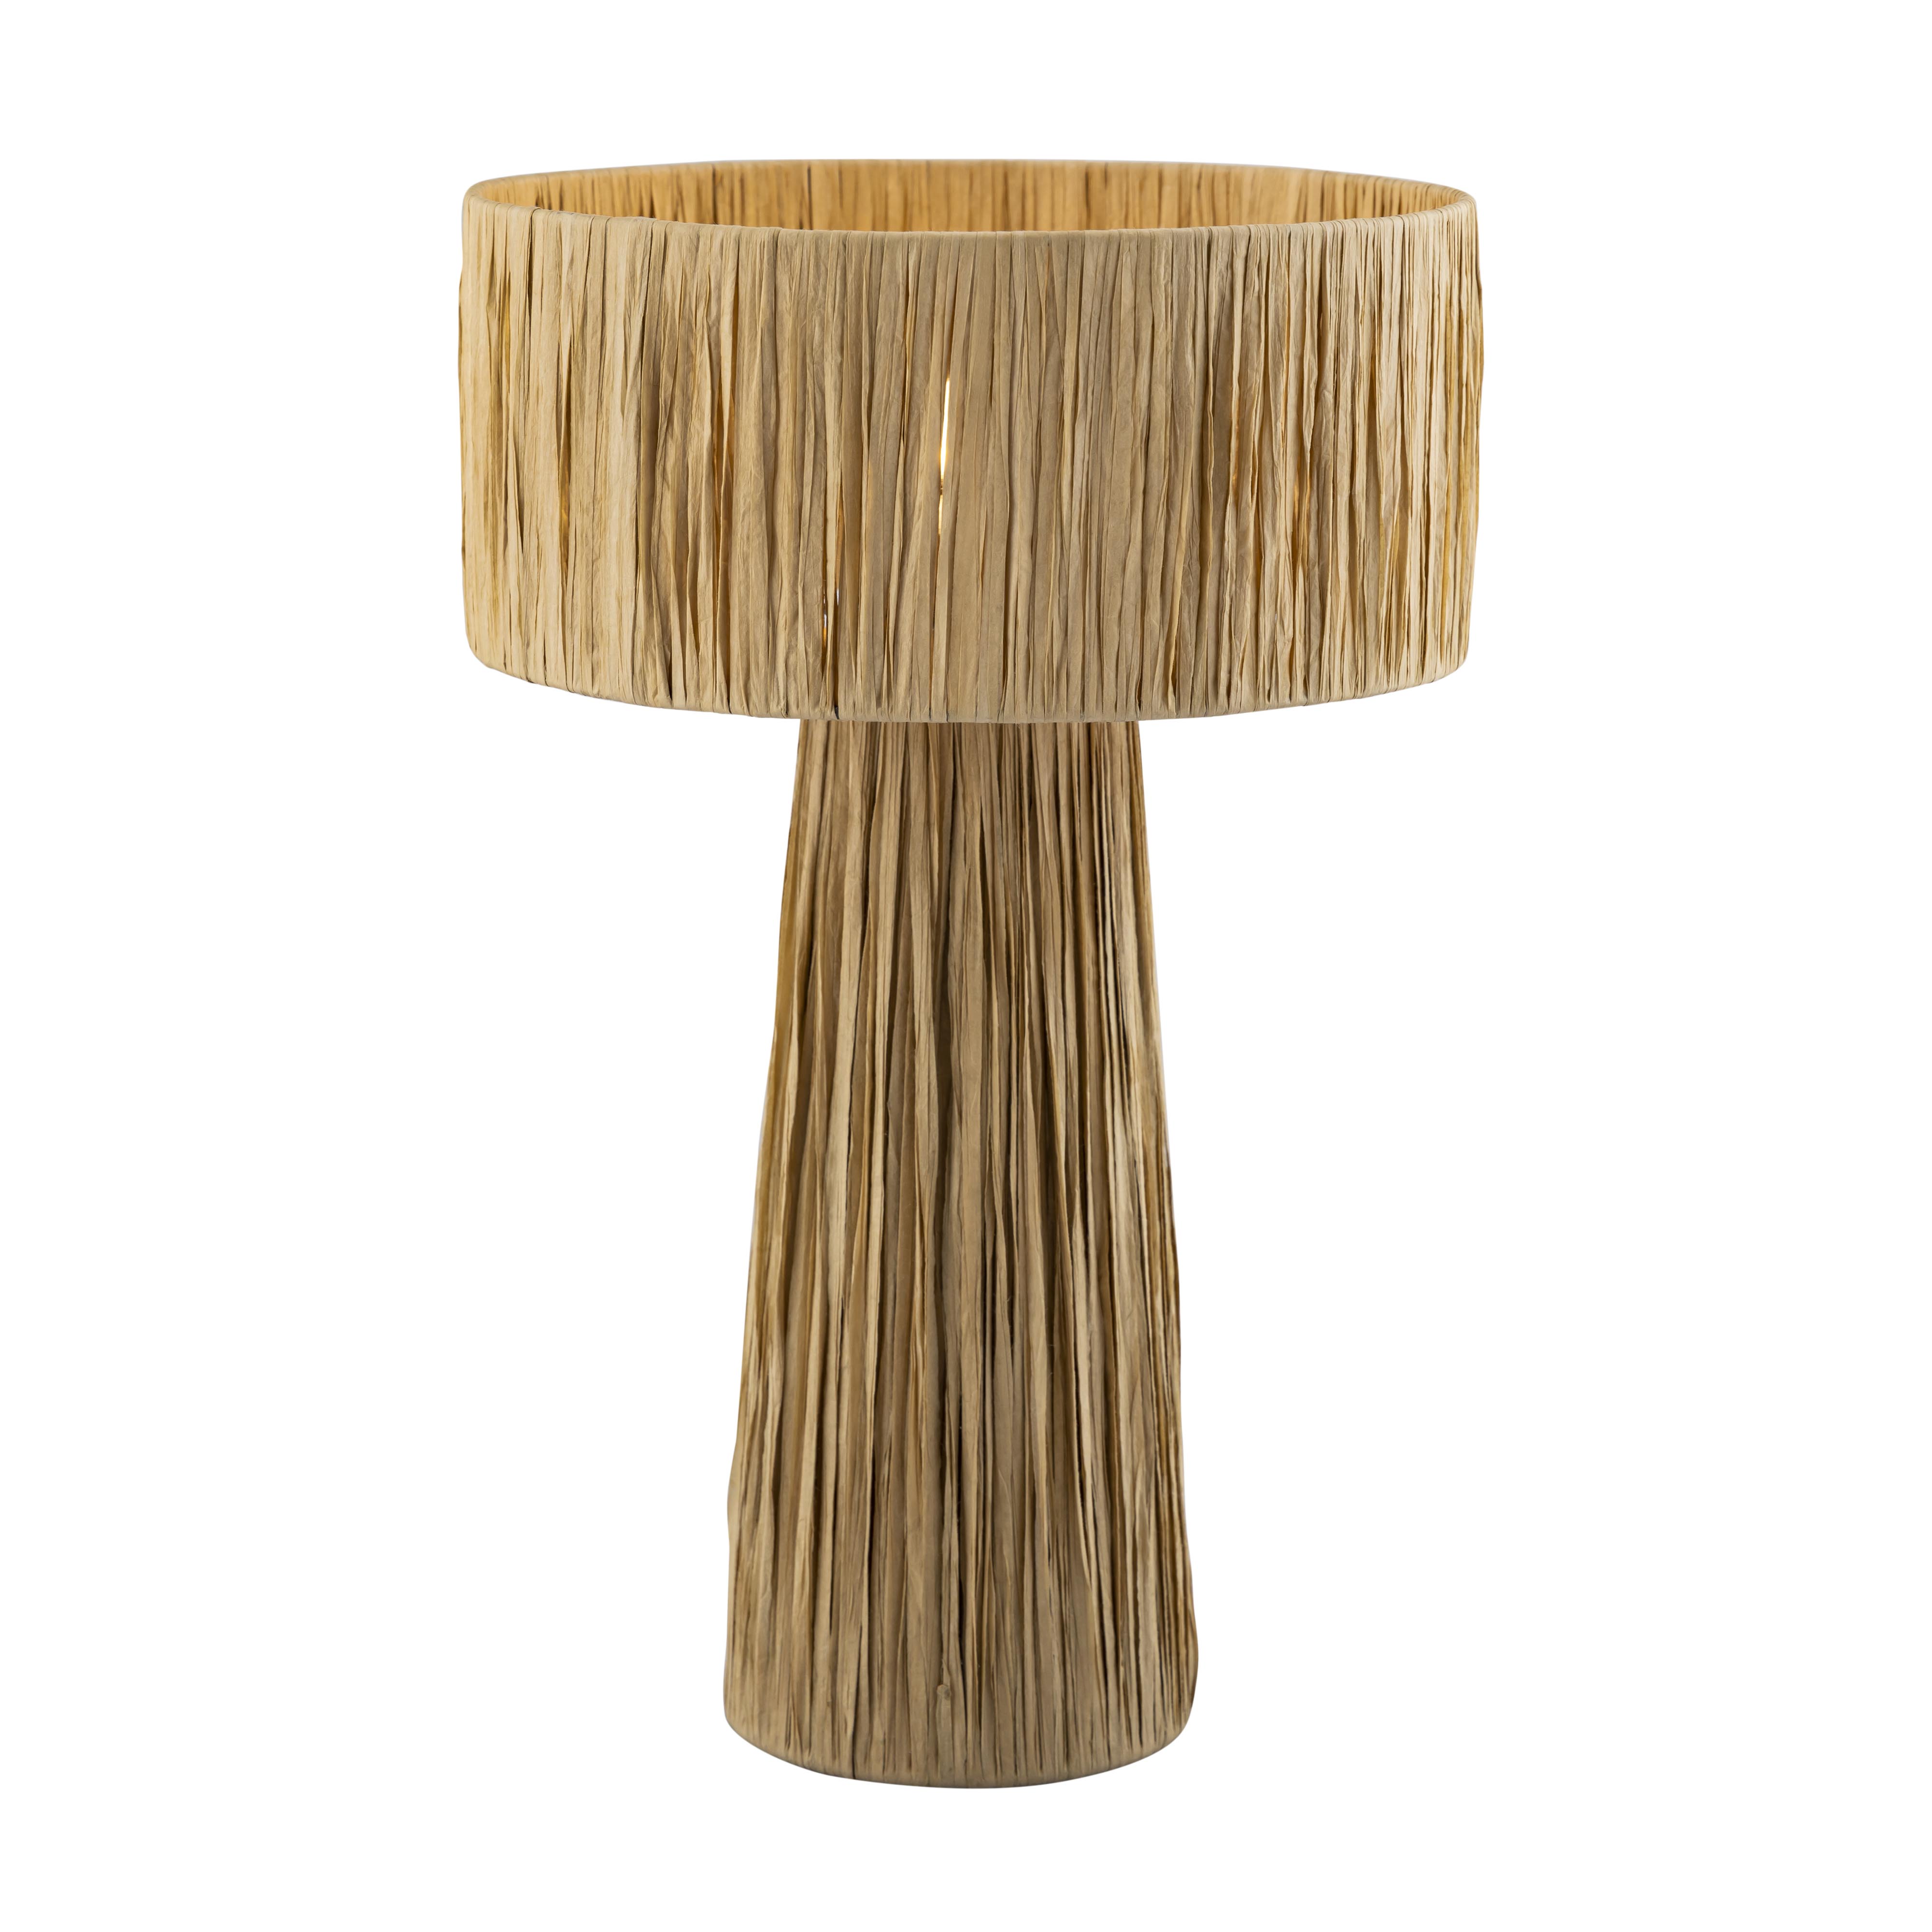 Shelby Rafia Natural Table Lamp - image 1 of 8